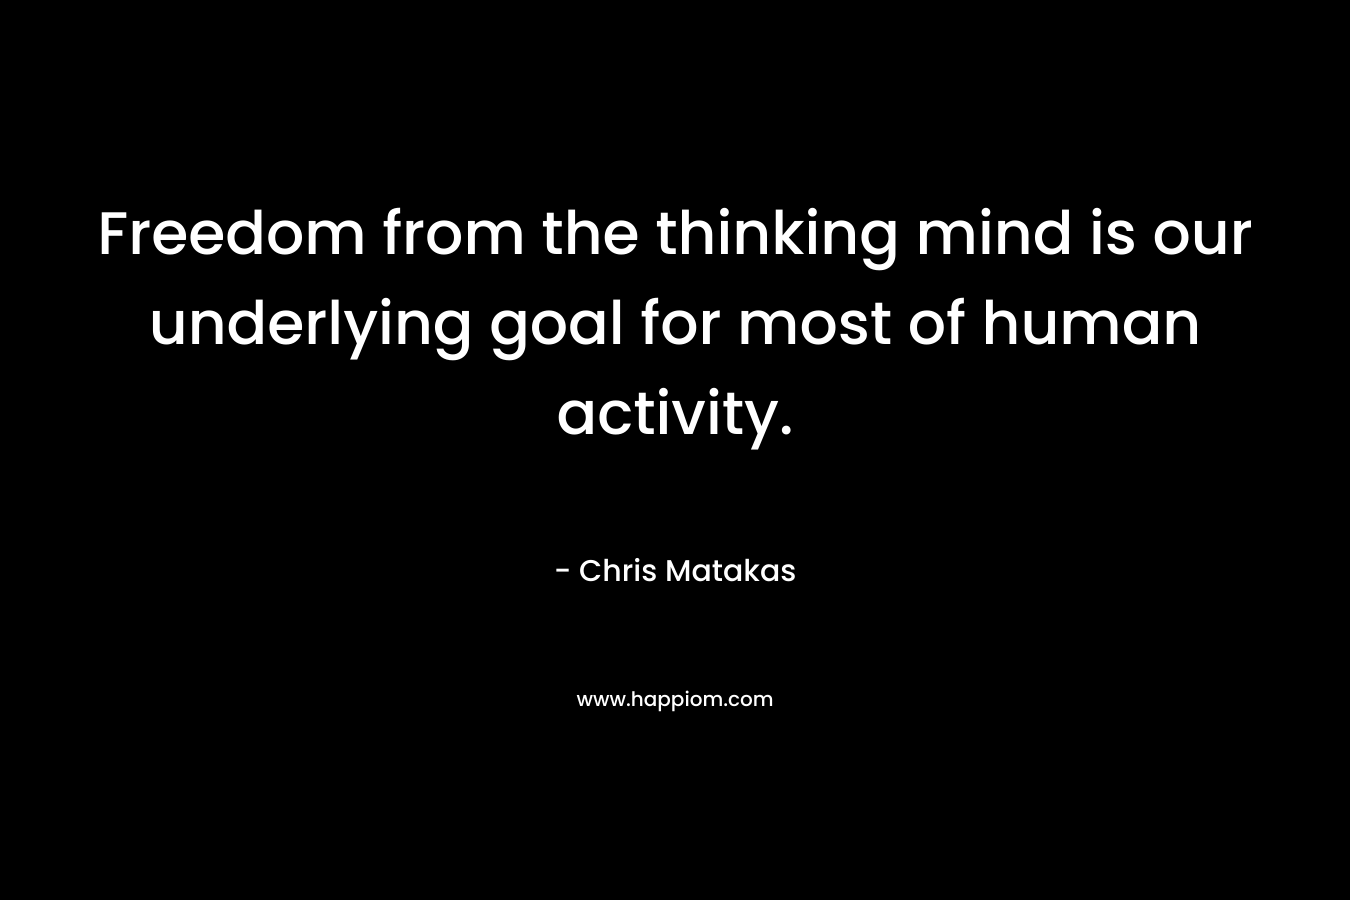 Freedom from the thinking mind is our underlying goal for most of human activity.